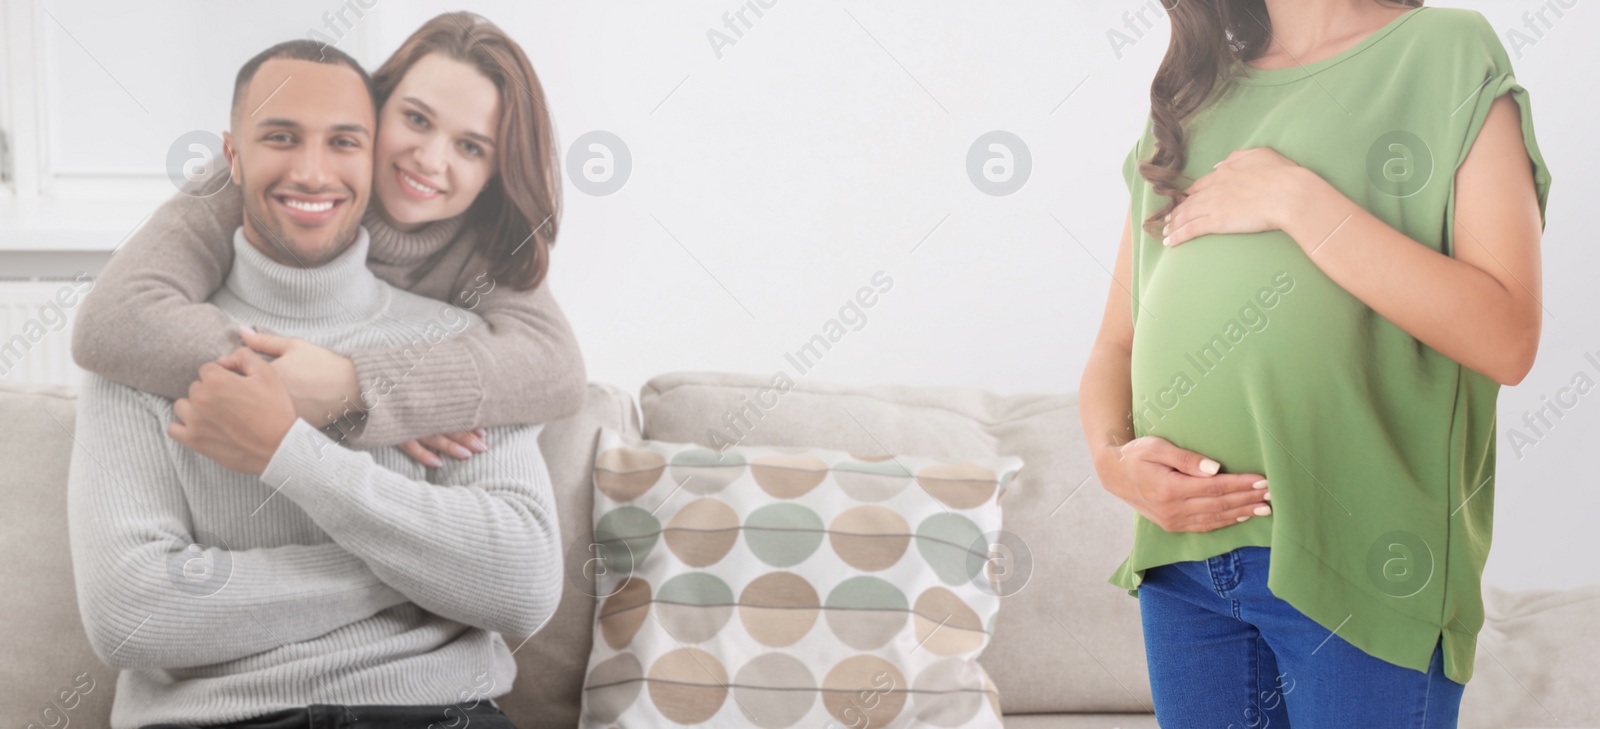 Image of Surrogate mother and intended parents indoors. Banner design